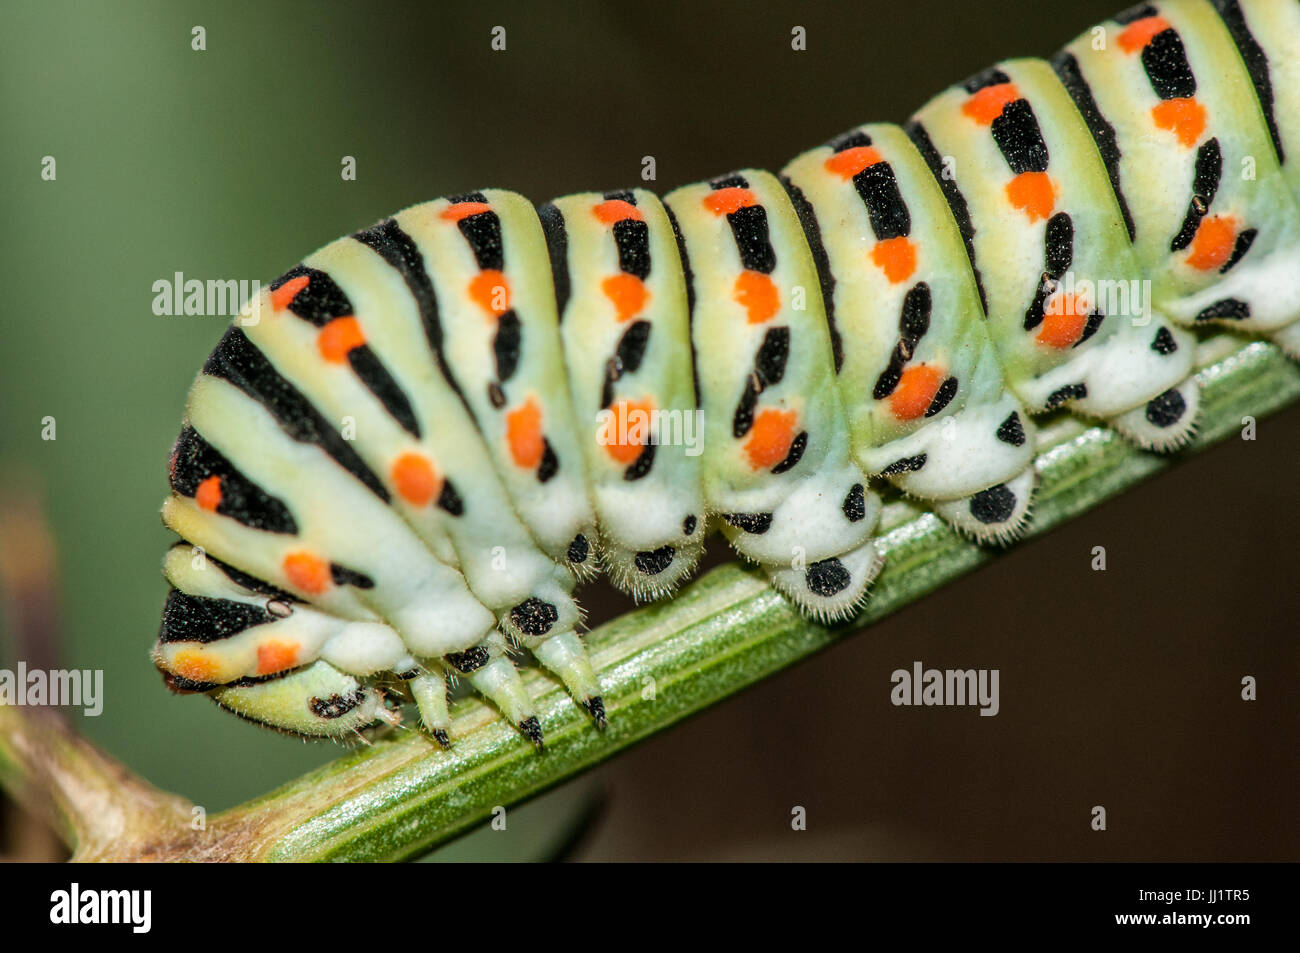 common yellow swallowtail caterpillar (Papilio machaon) perched on a branch at dusk Stock Photo